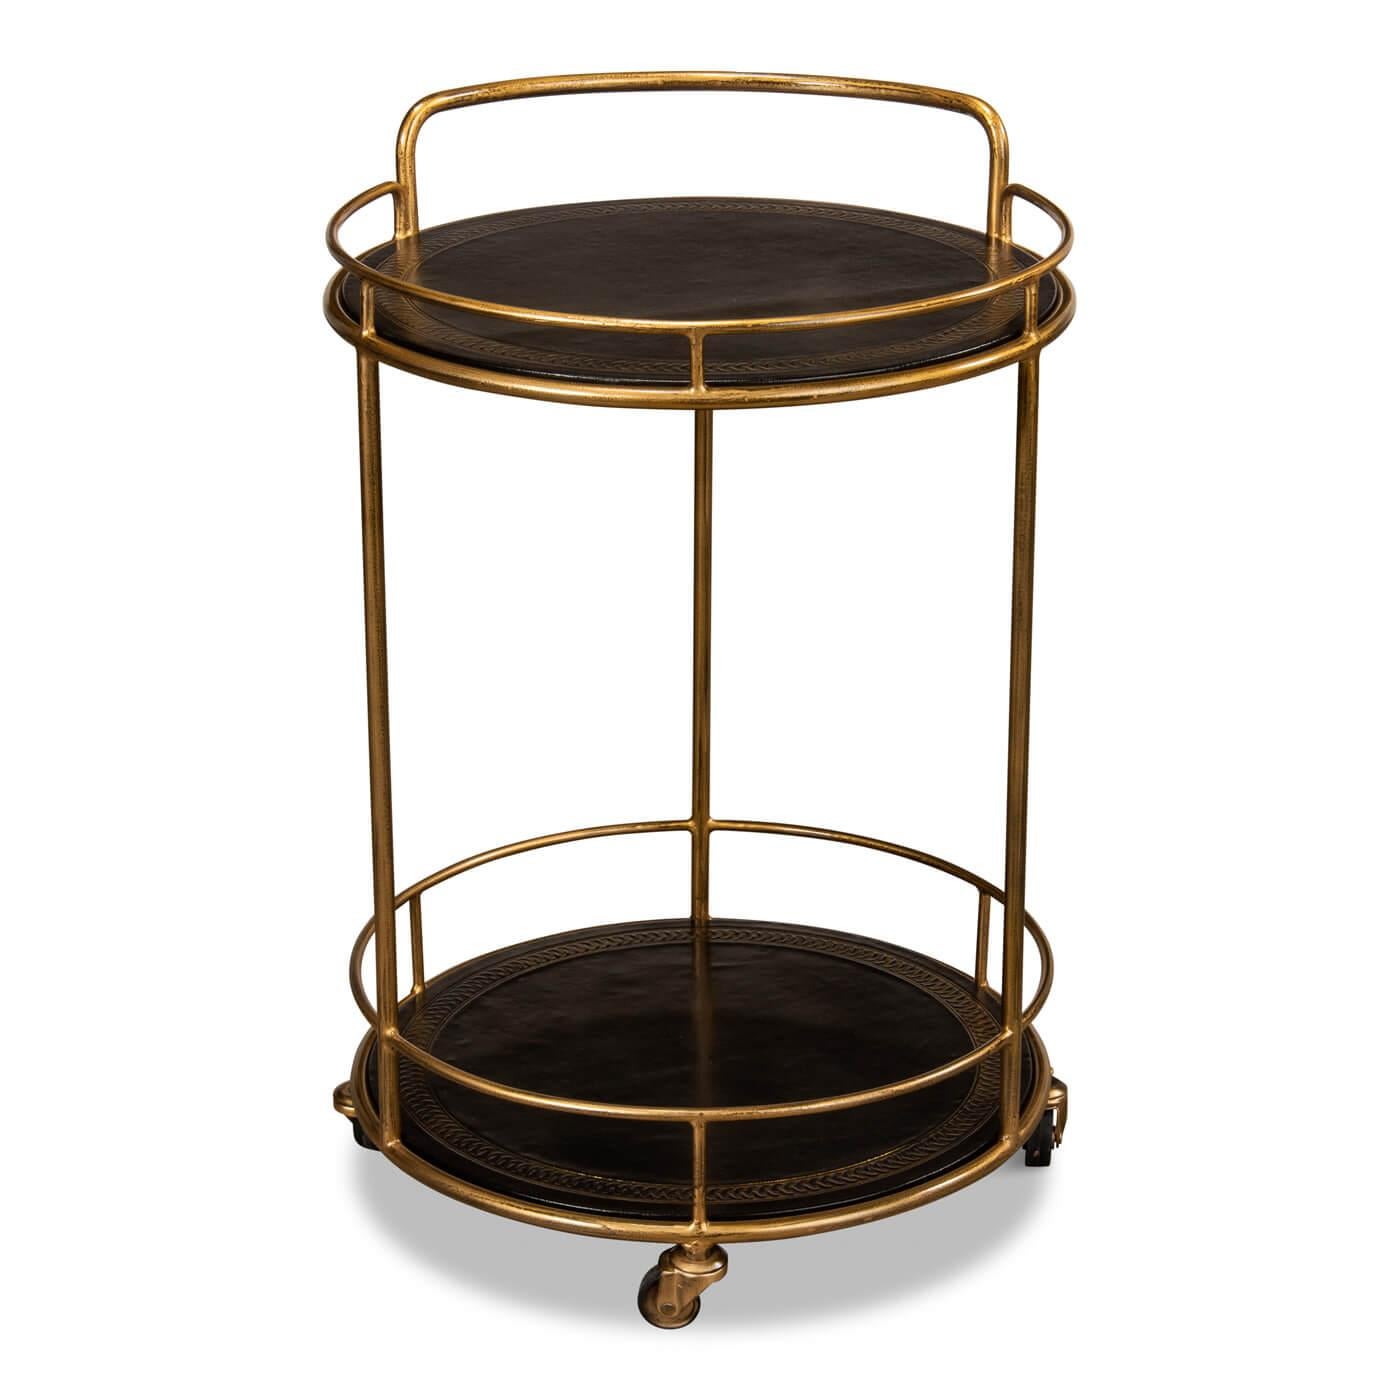 Modern iron and leather serving side table and cart. This smaller two-tiered round serving cart sits on gold casters and is accented with hand-antiqued and tooled leather-covered shelves. Timeless striking color combinations in elegant gold and